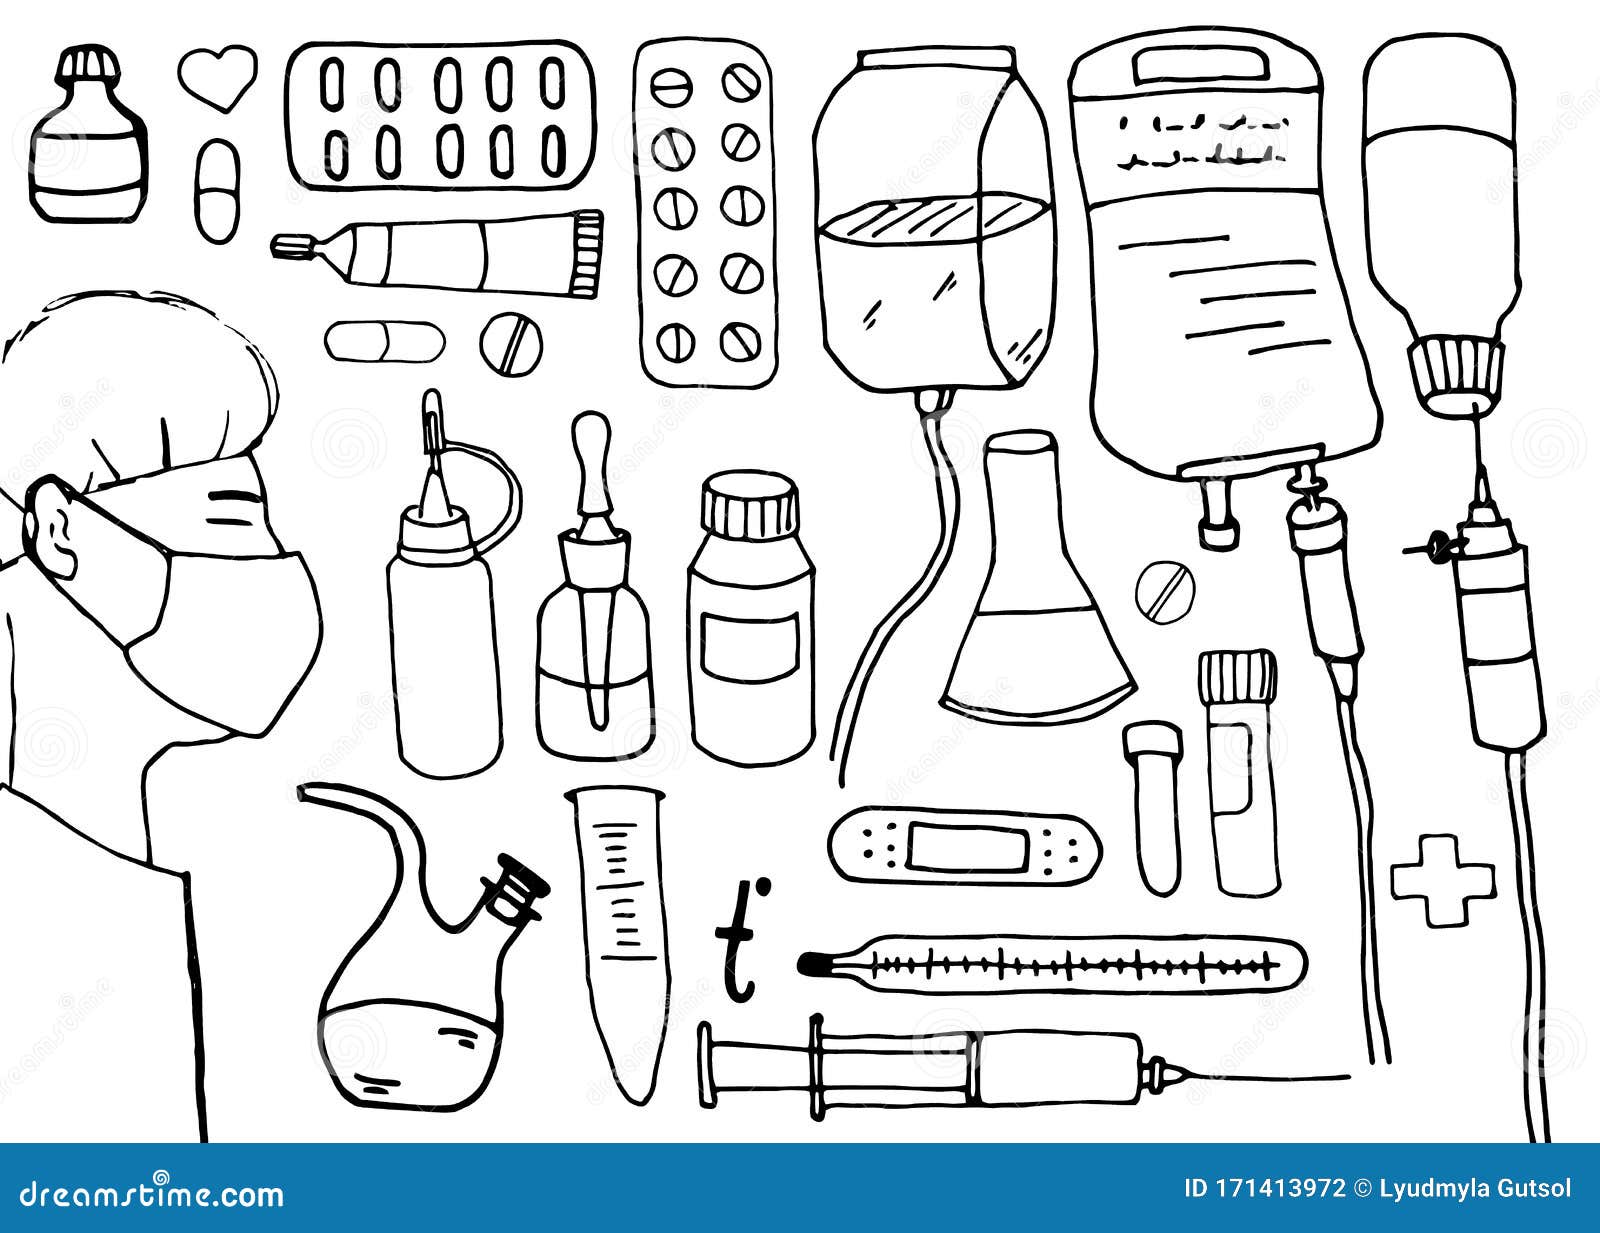 Sketch, Linear Drawing with Medicines. Set of Hospital Items